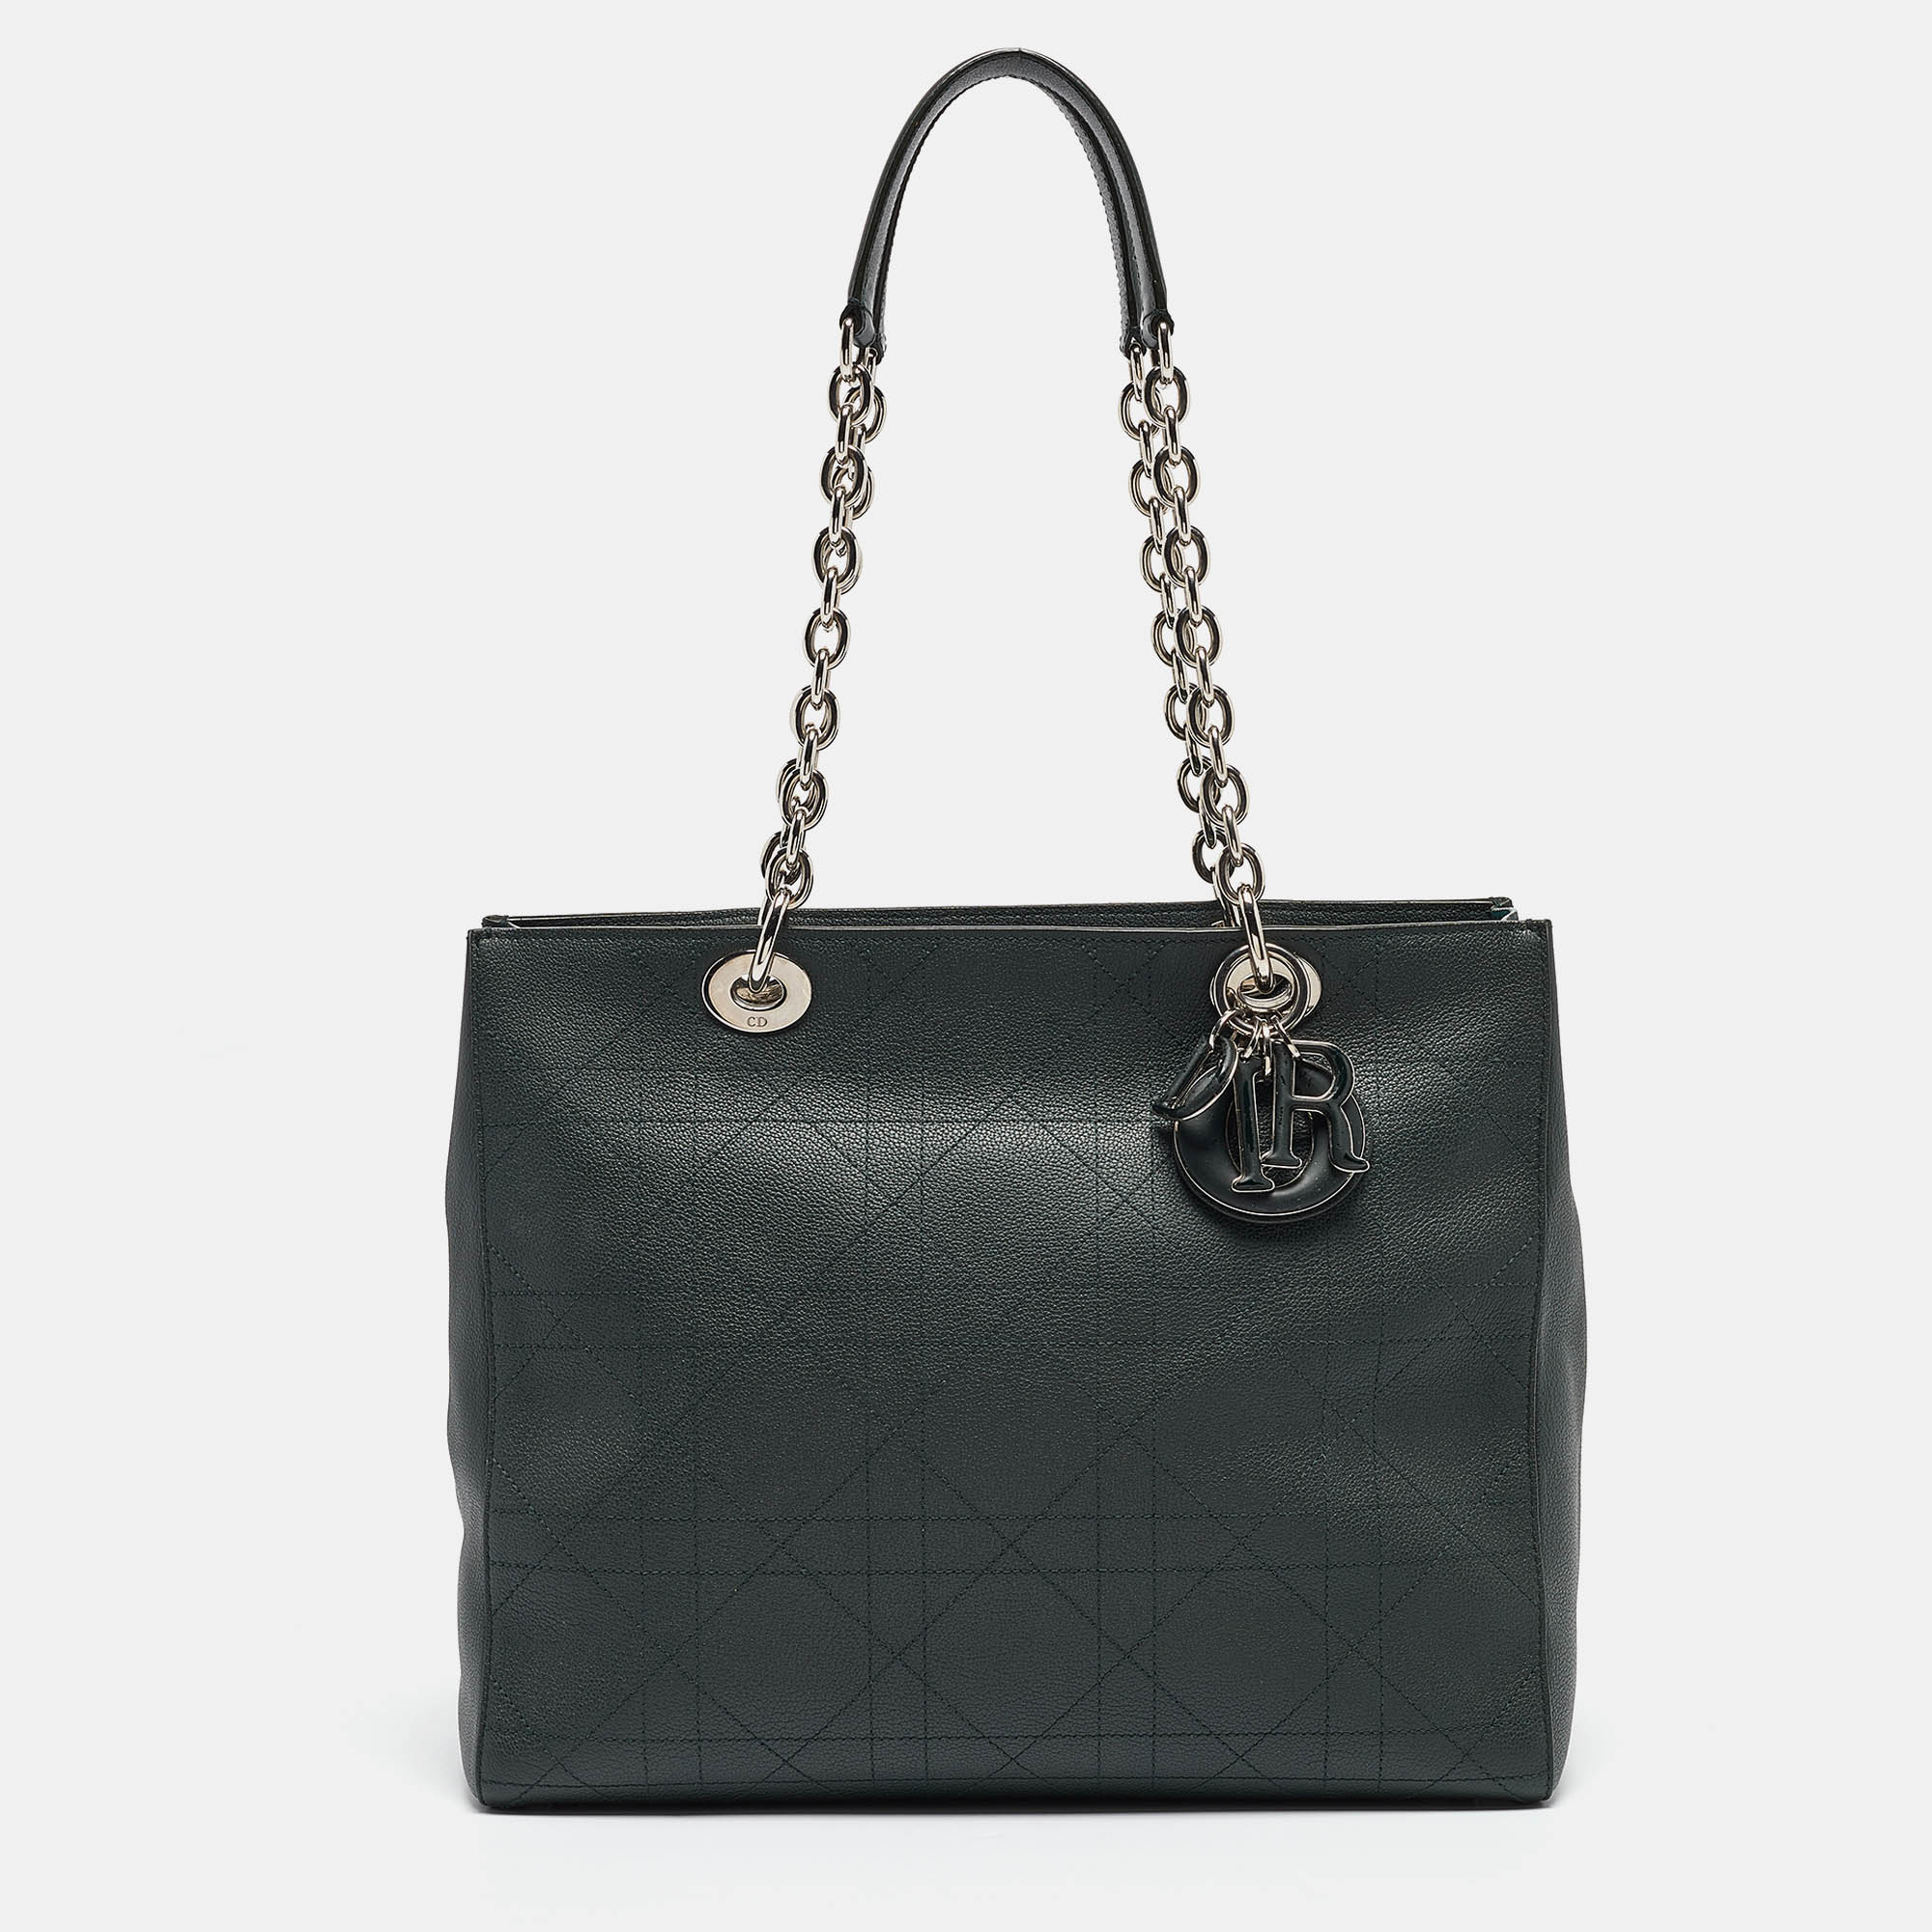 Dior dark green cannage leather large ultradior tote